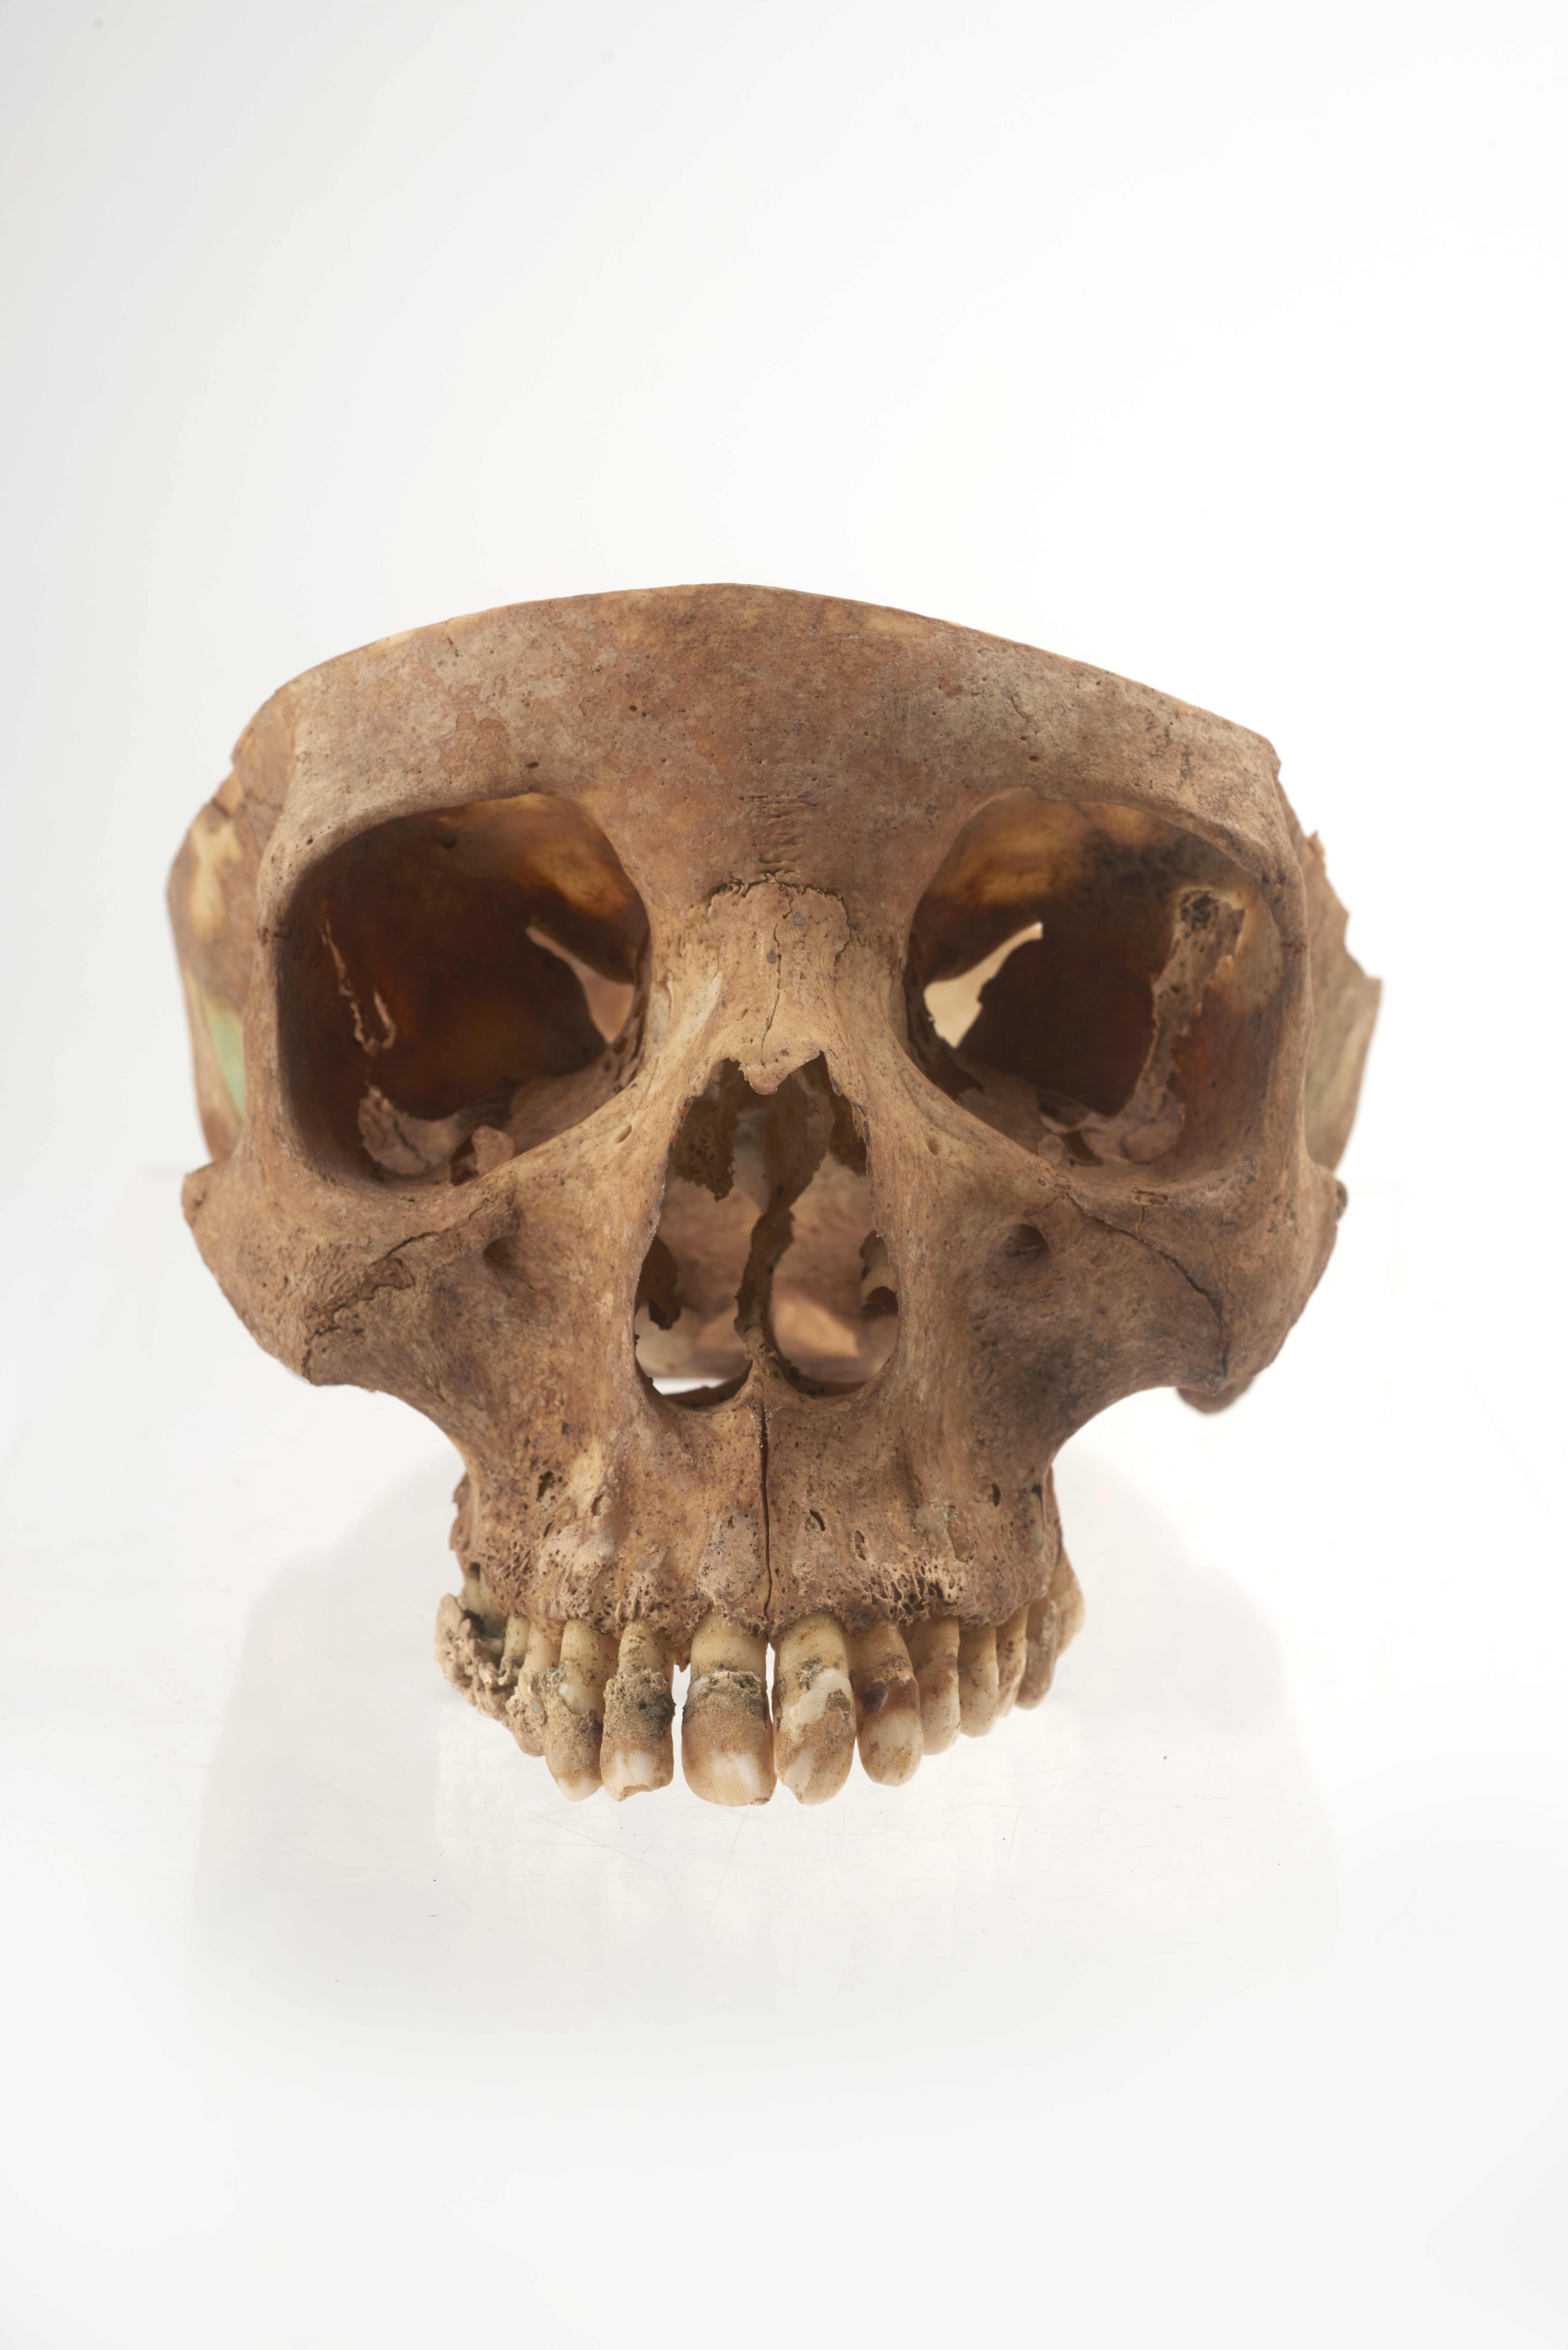 Woman's skull with severe dental plaque (Museum Of London)